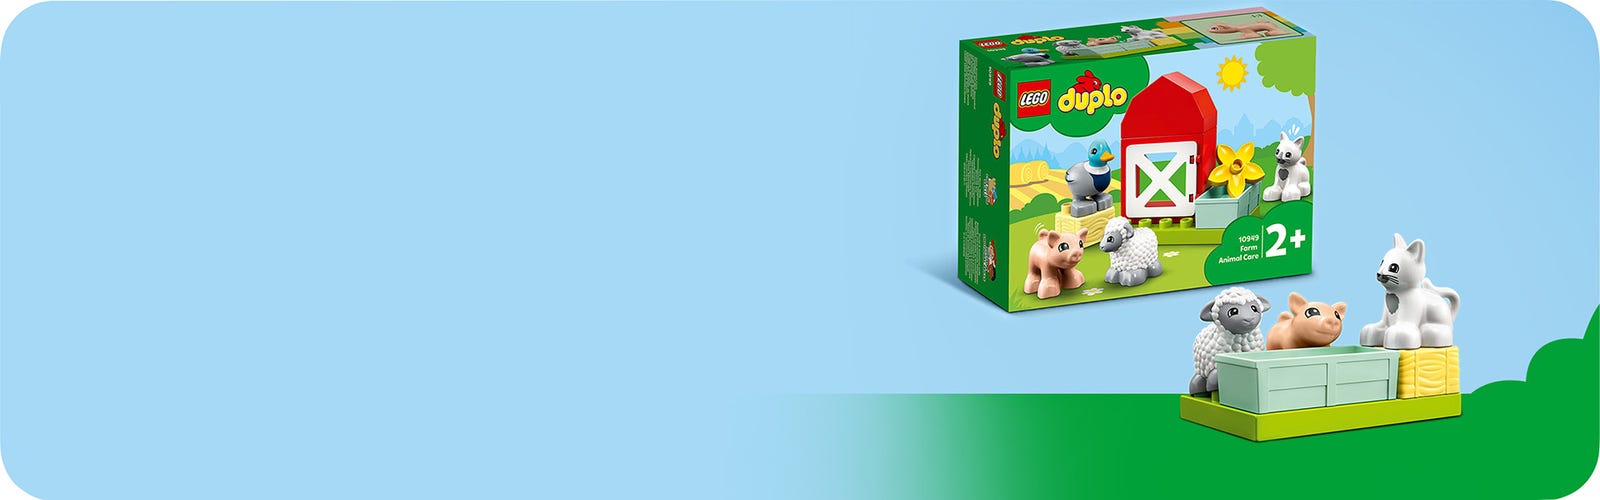 Farm Animal online Shop | 10949 DUPLO® | US the Care LEGO® Buy at Official